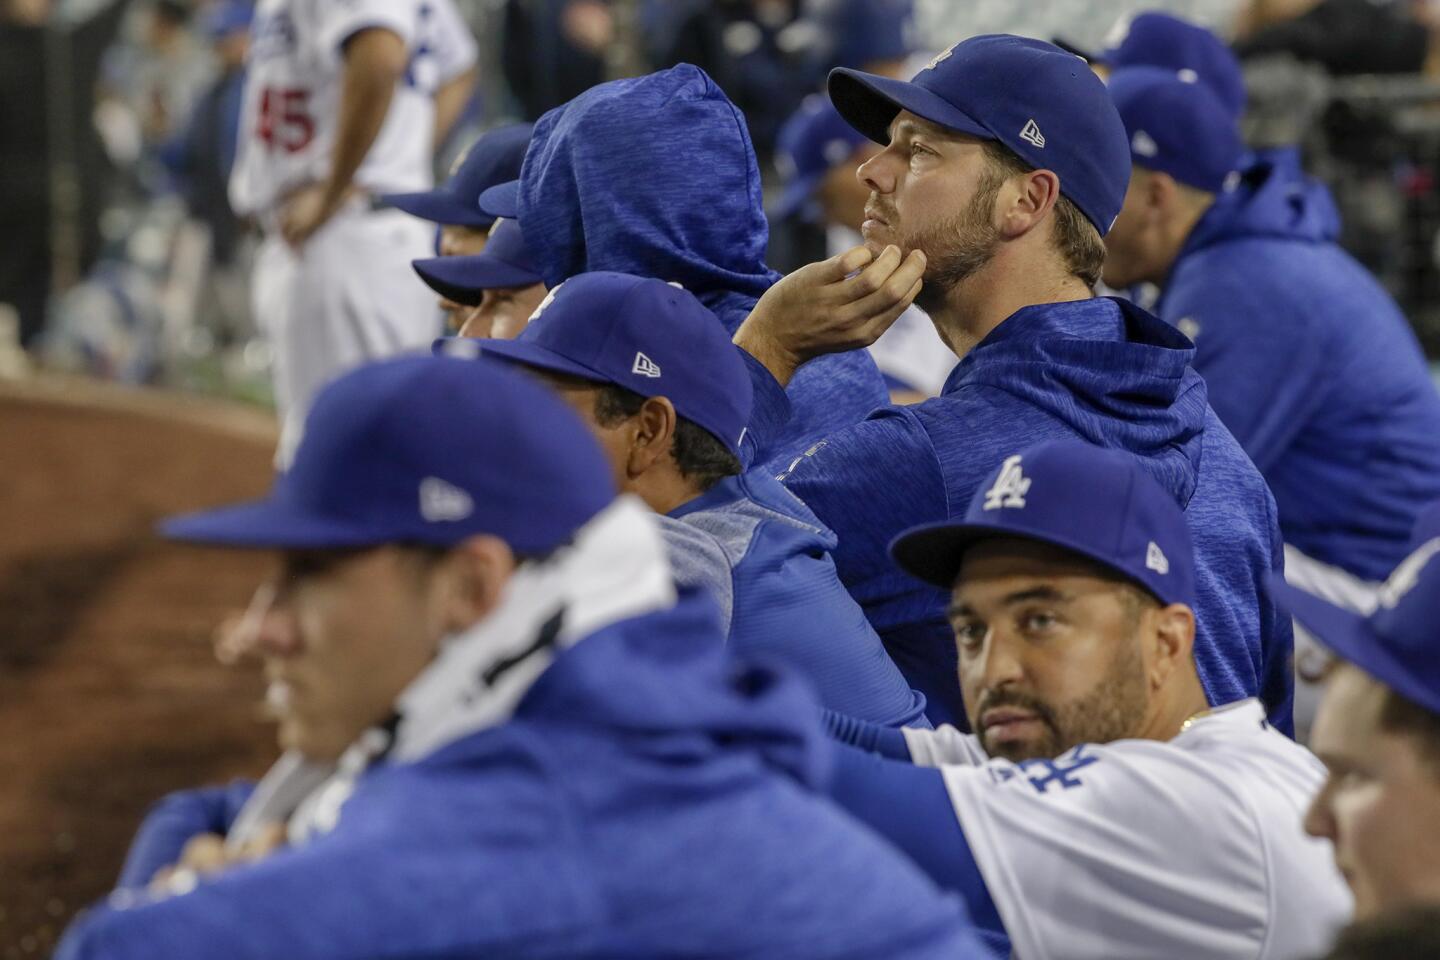 Dodgers players look on from the bench as the Red Sox carry a 5-1 lead late in game five.